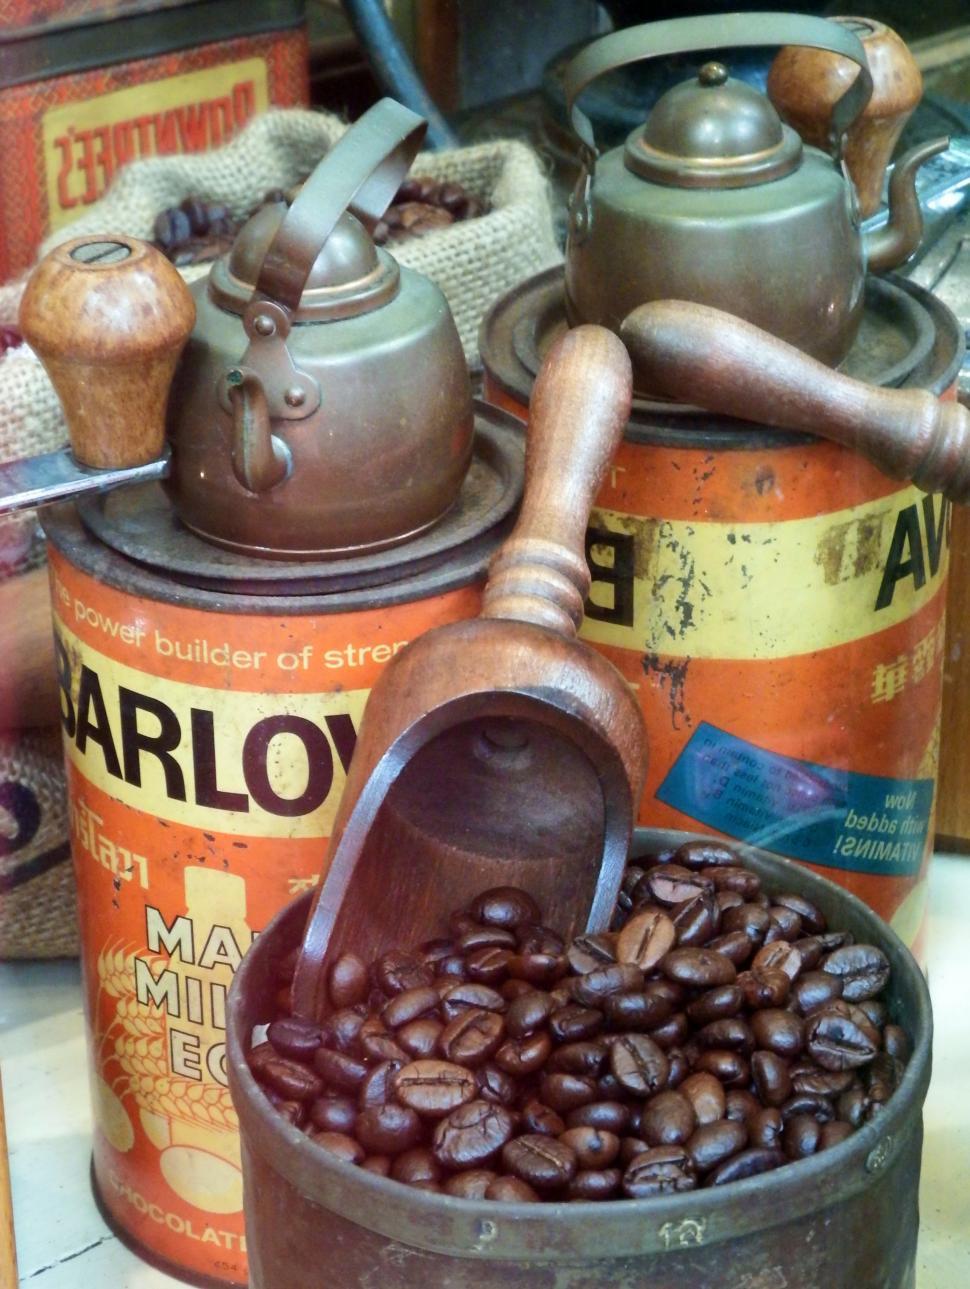 Free Image of Coffee Beans with Vintage Memorabilia  